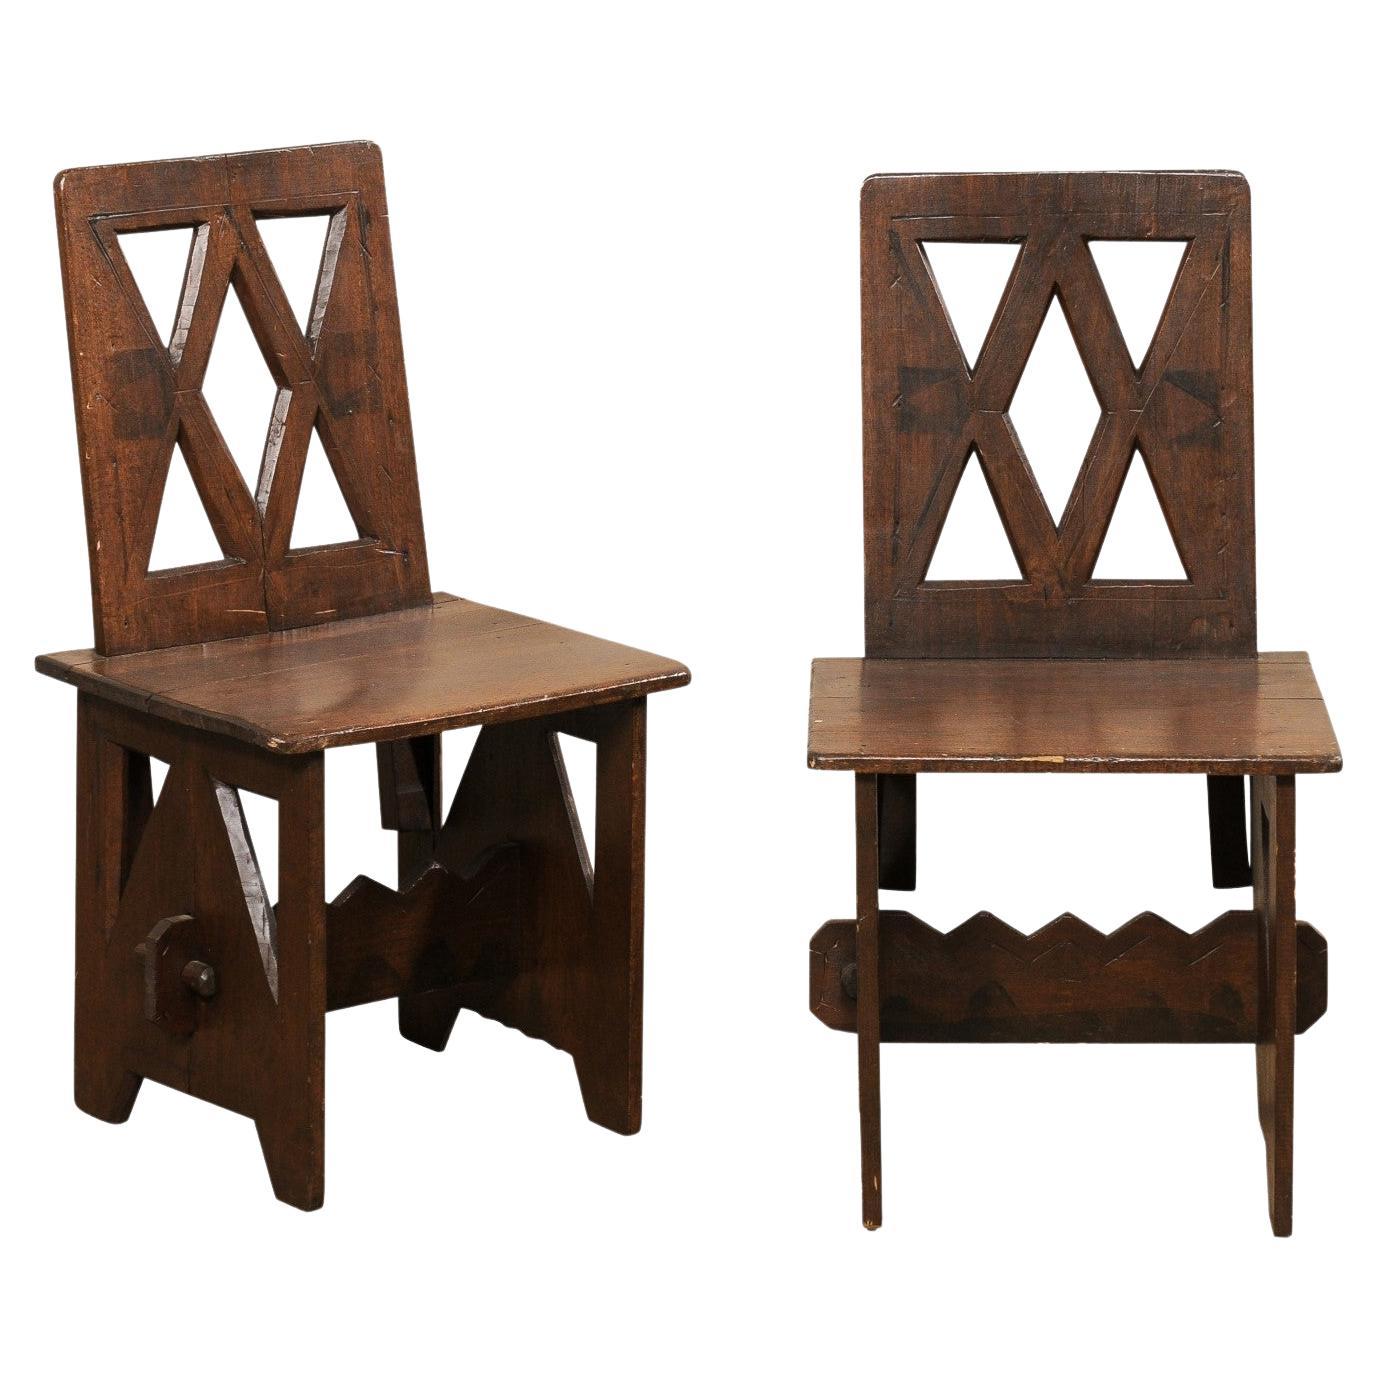 Interesting Pair of Carved Fire-Side Chairs W/Geometric Cut-Outs, N. Africa